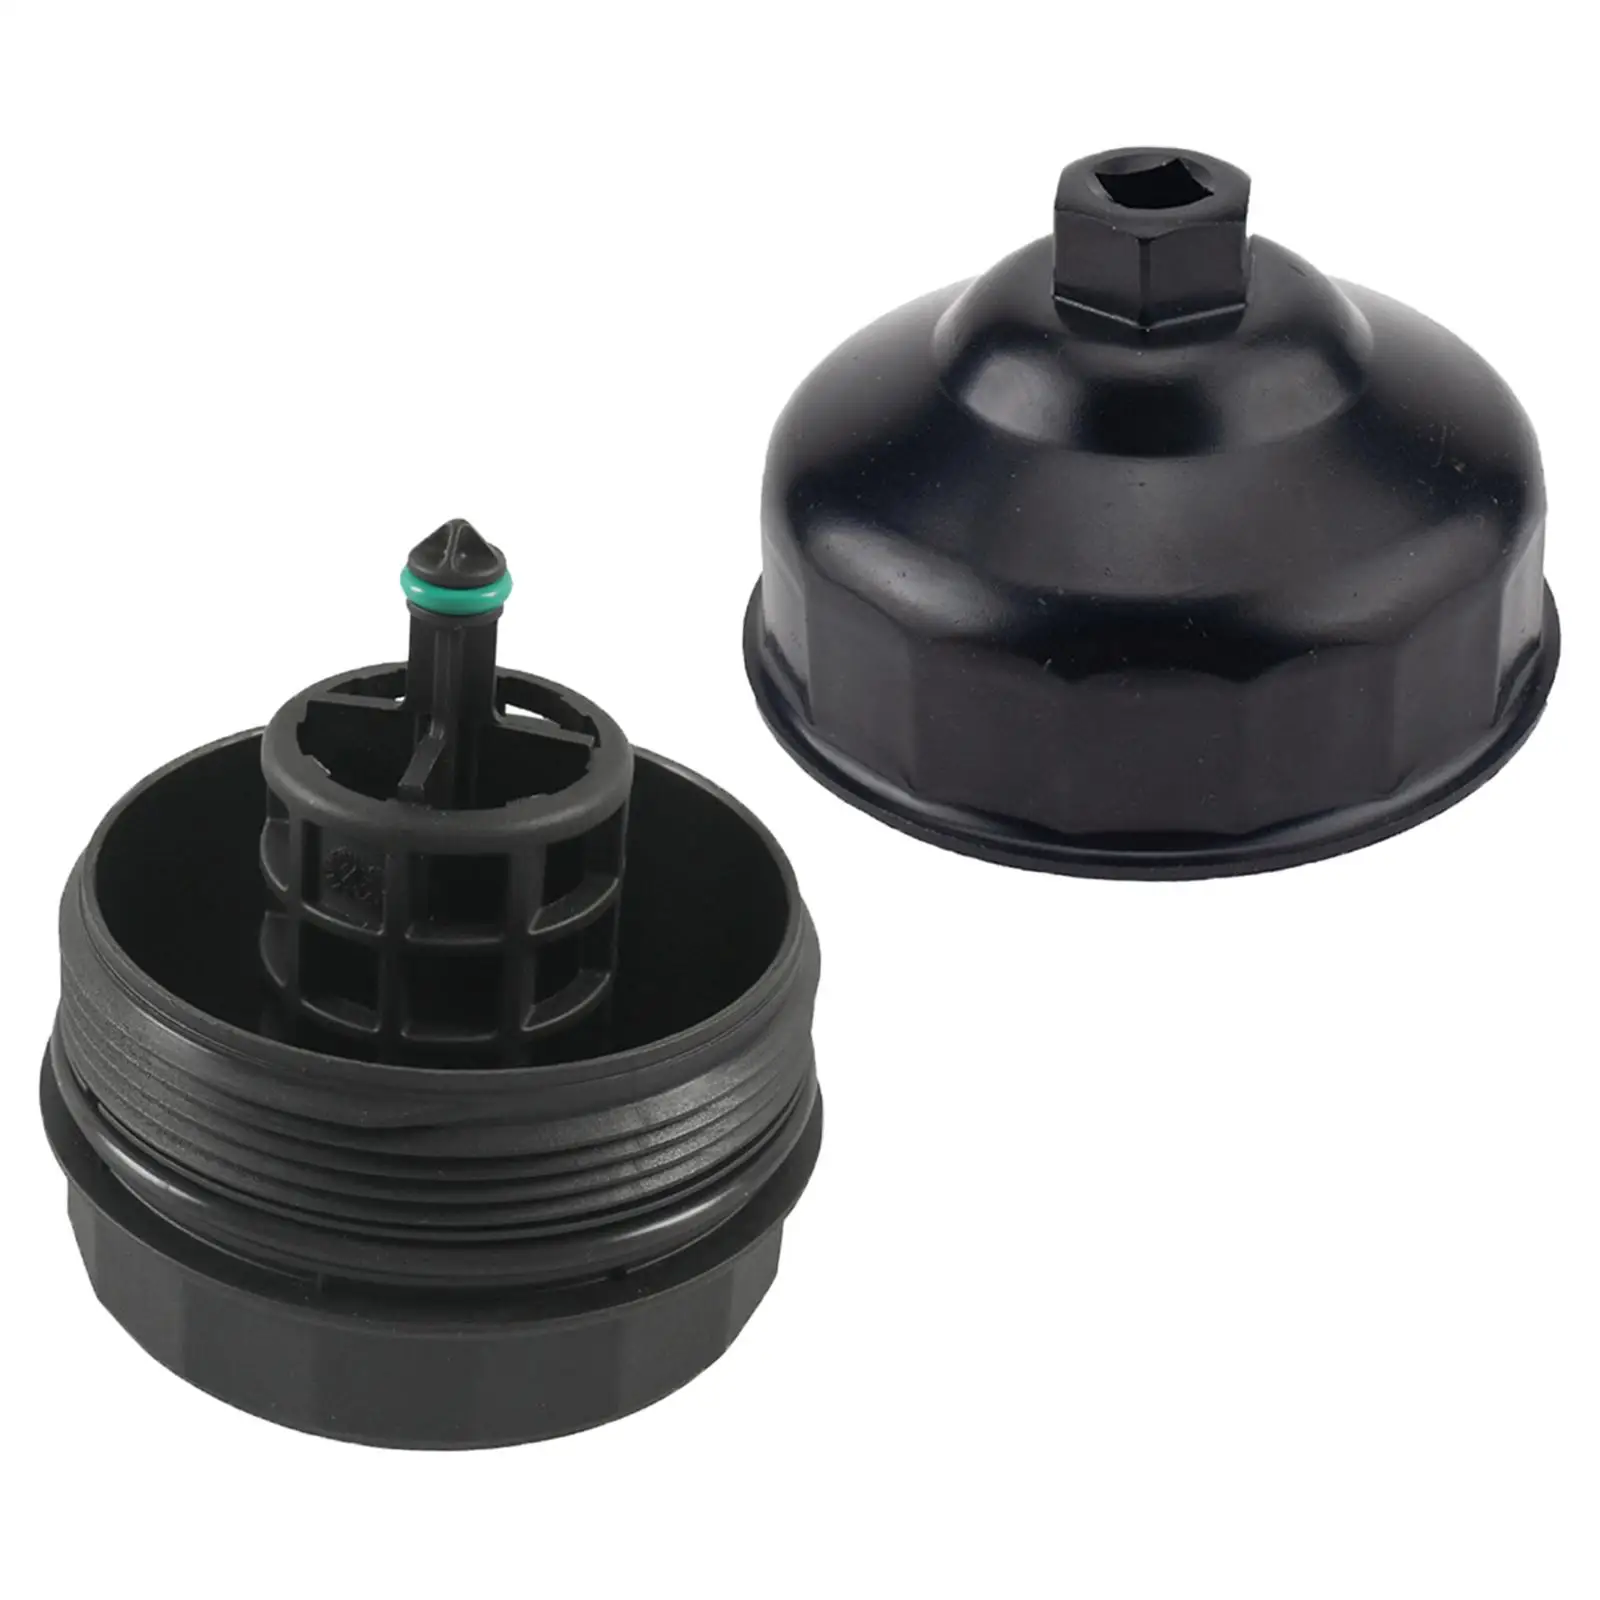 Oil Filter Housing Cover Caps 11427525334 Replace for BMW Z4 x1 x3 x4 x5 x6 M2 M3 M4 525Xi 528i